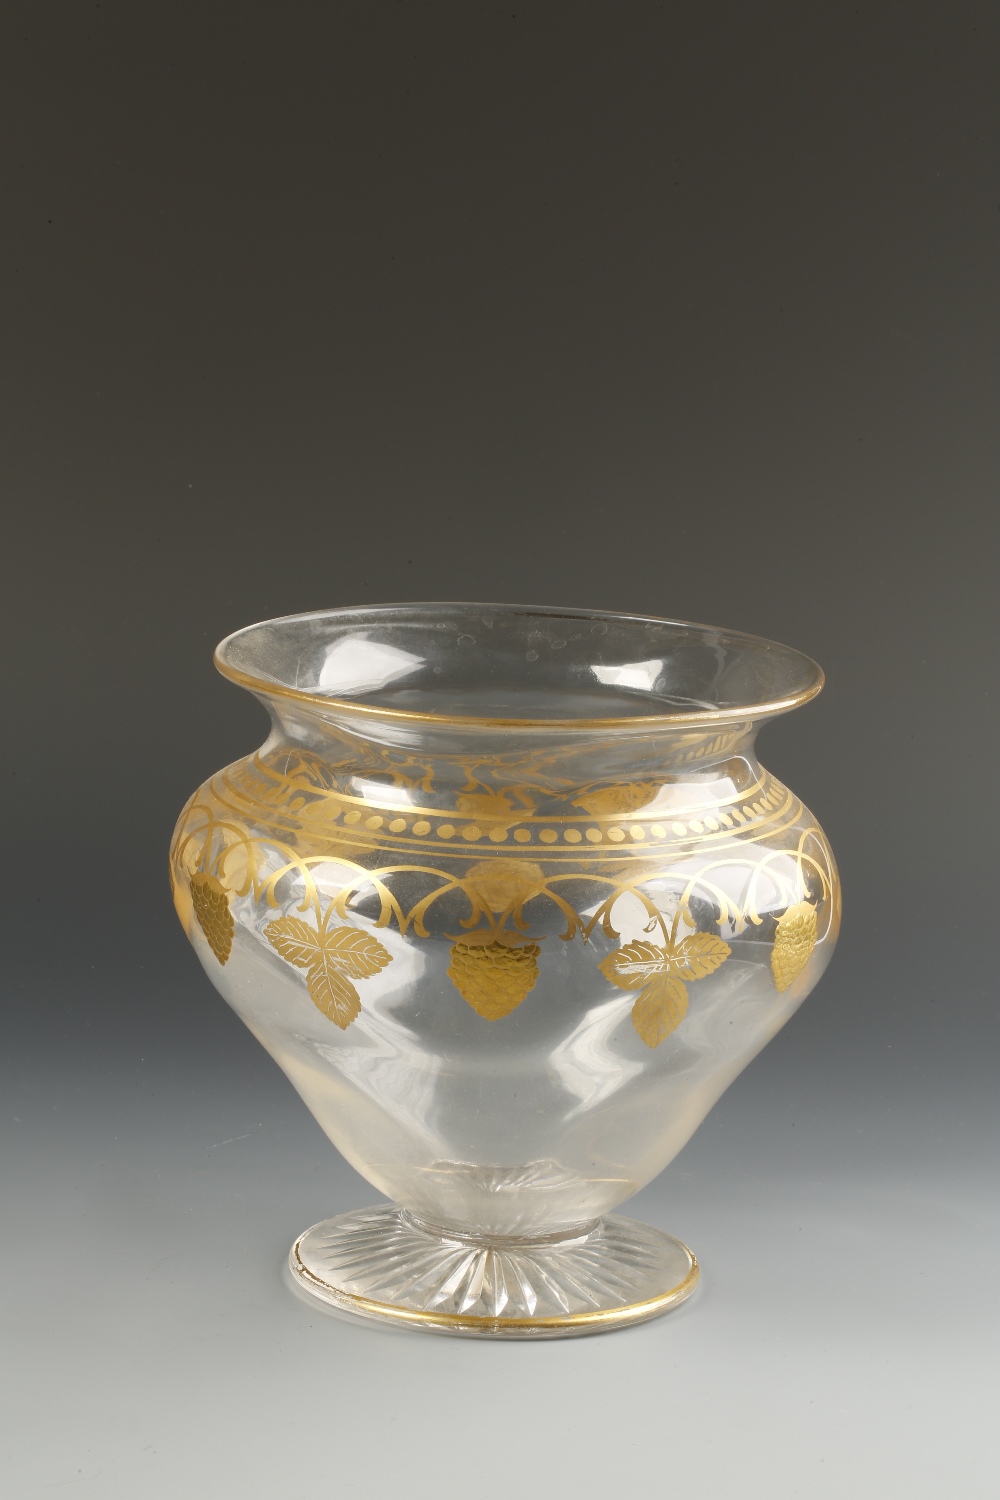 A VICTORIAN CLEAR AND GILT GLASS "STRAWBERRY" BOWL of bellied shouldered form, decorated in gilt